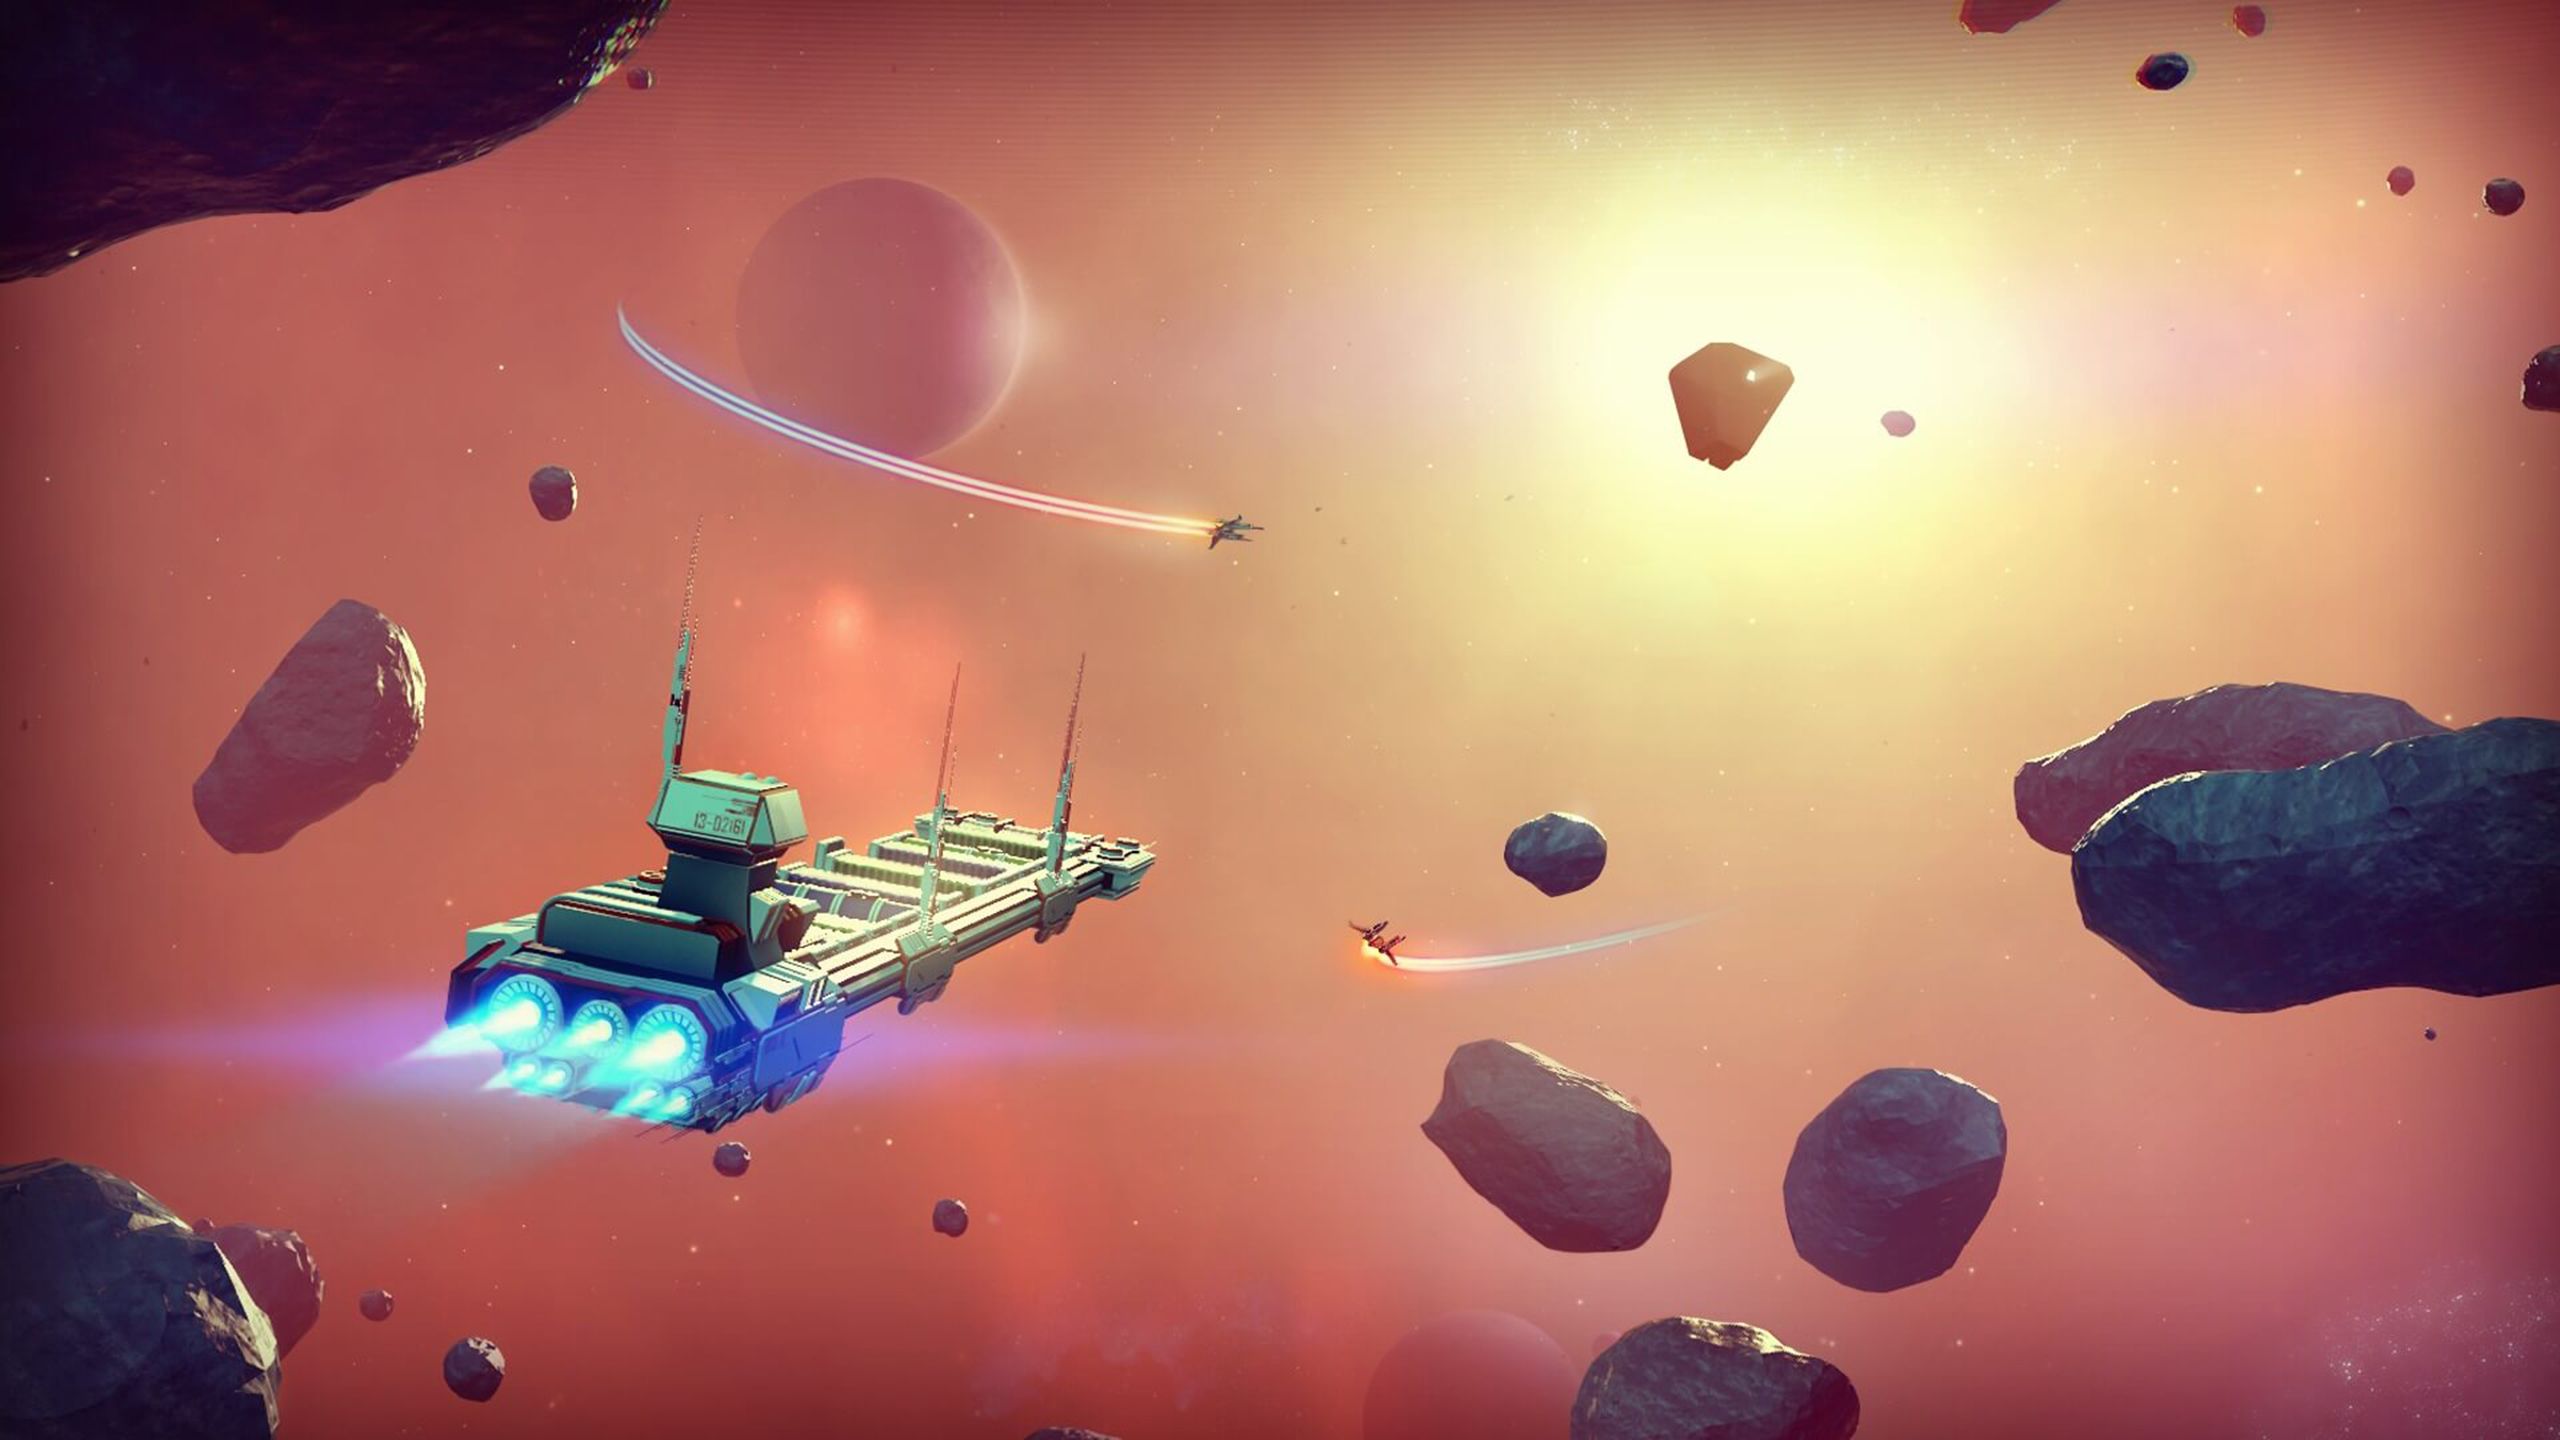 Screenshot from video game No Man's Sky in space